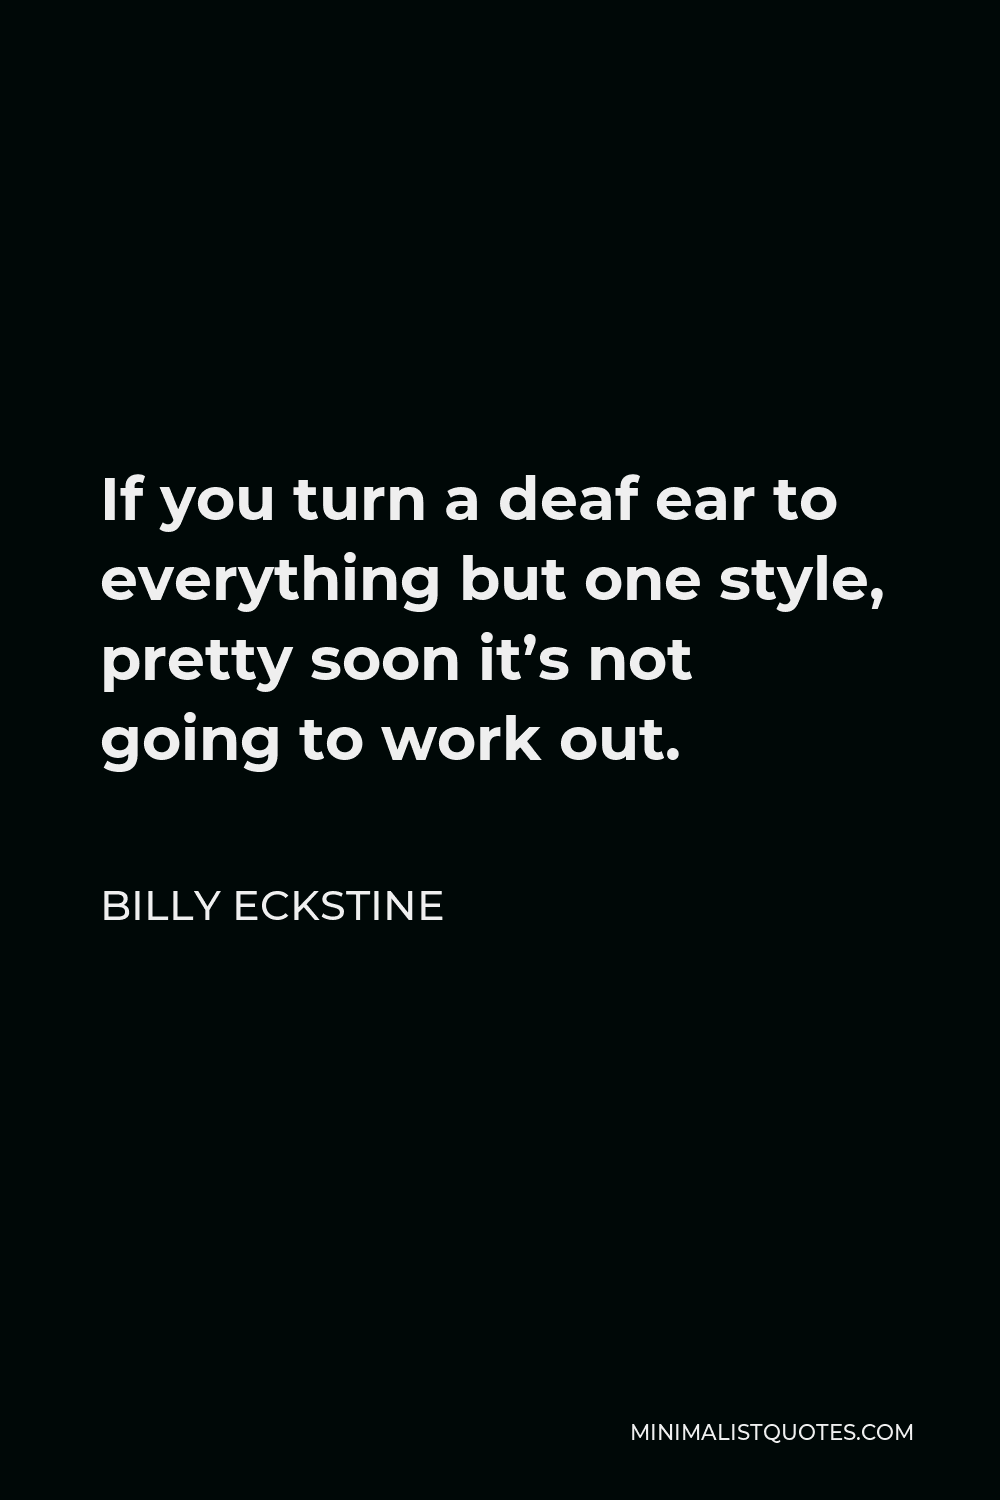 Billy Eckstine Quote - If you turn a deaf ear to everything but one style, pretty soon it’s not going to work out.